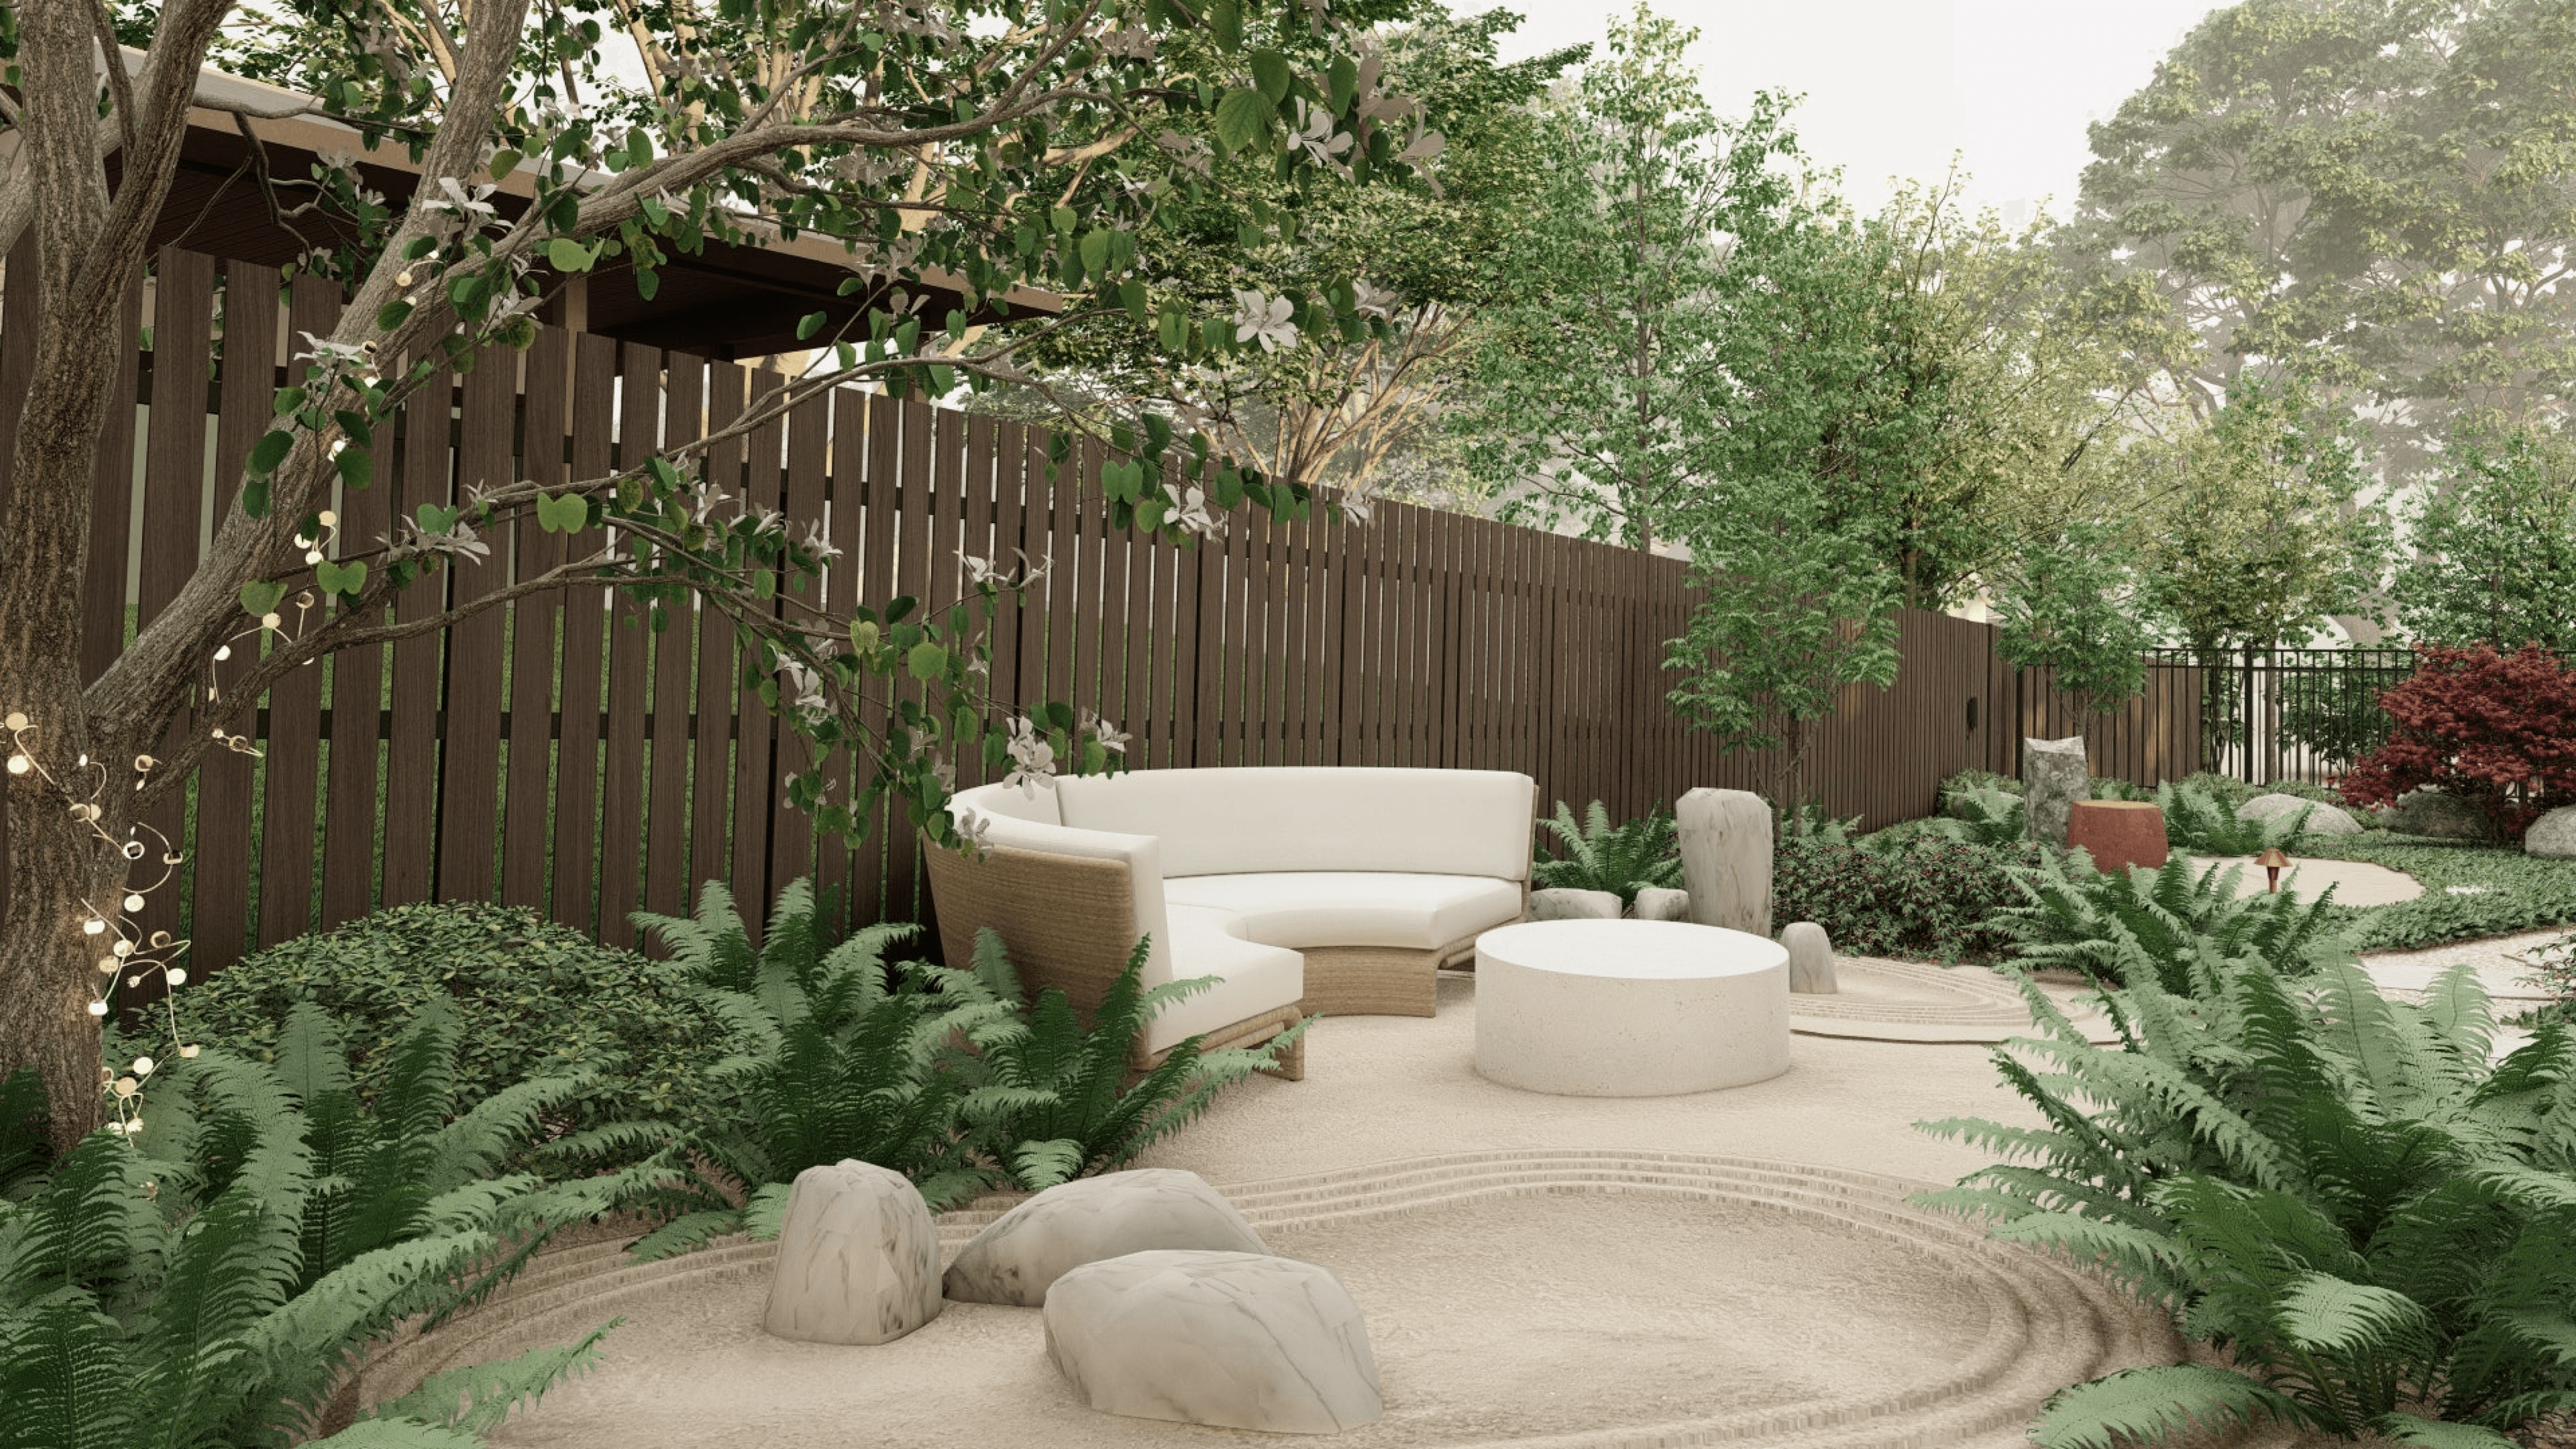 a design for a zen garden, including a rounded couch and table to match the curved lines of the raked gravel